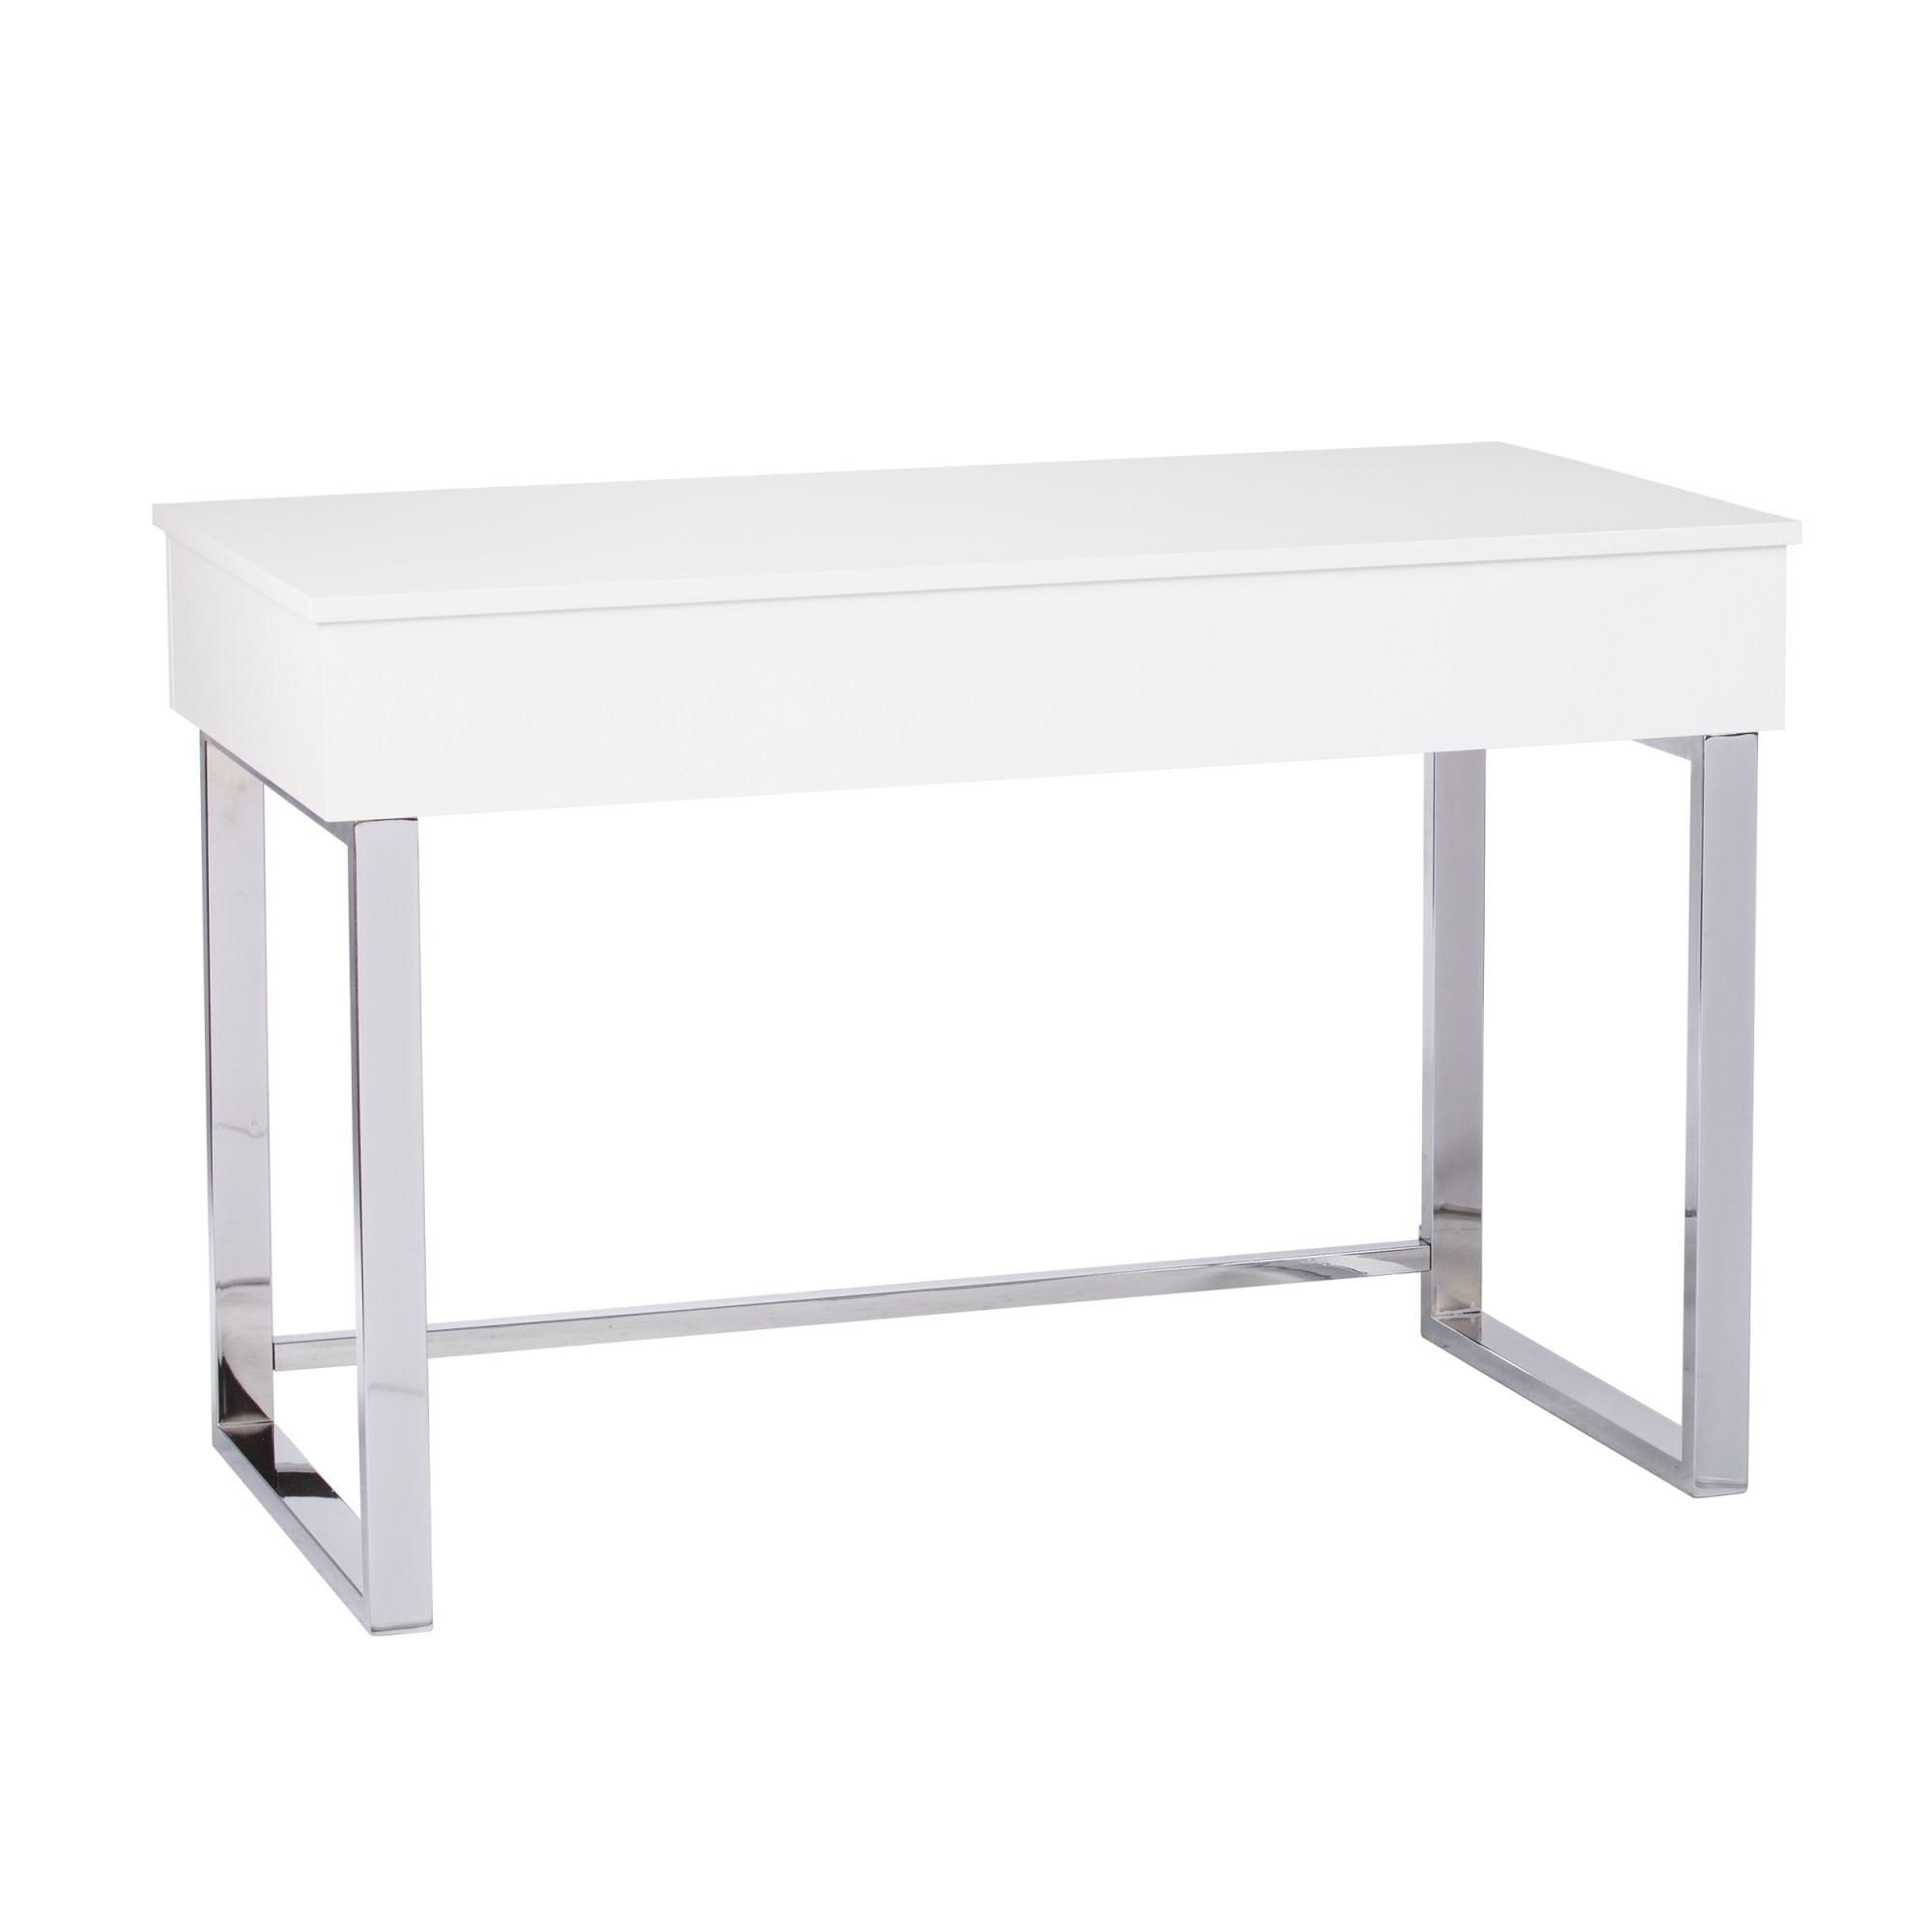 White Adjustable Height Sit-Stand Desk with Chrome Legs